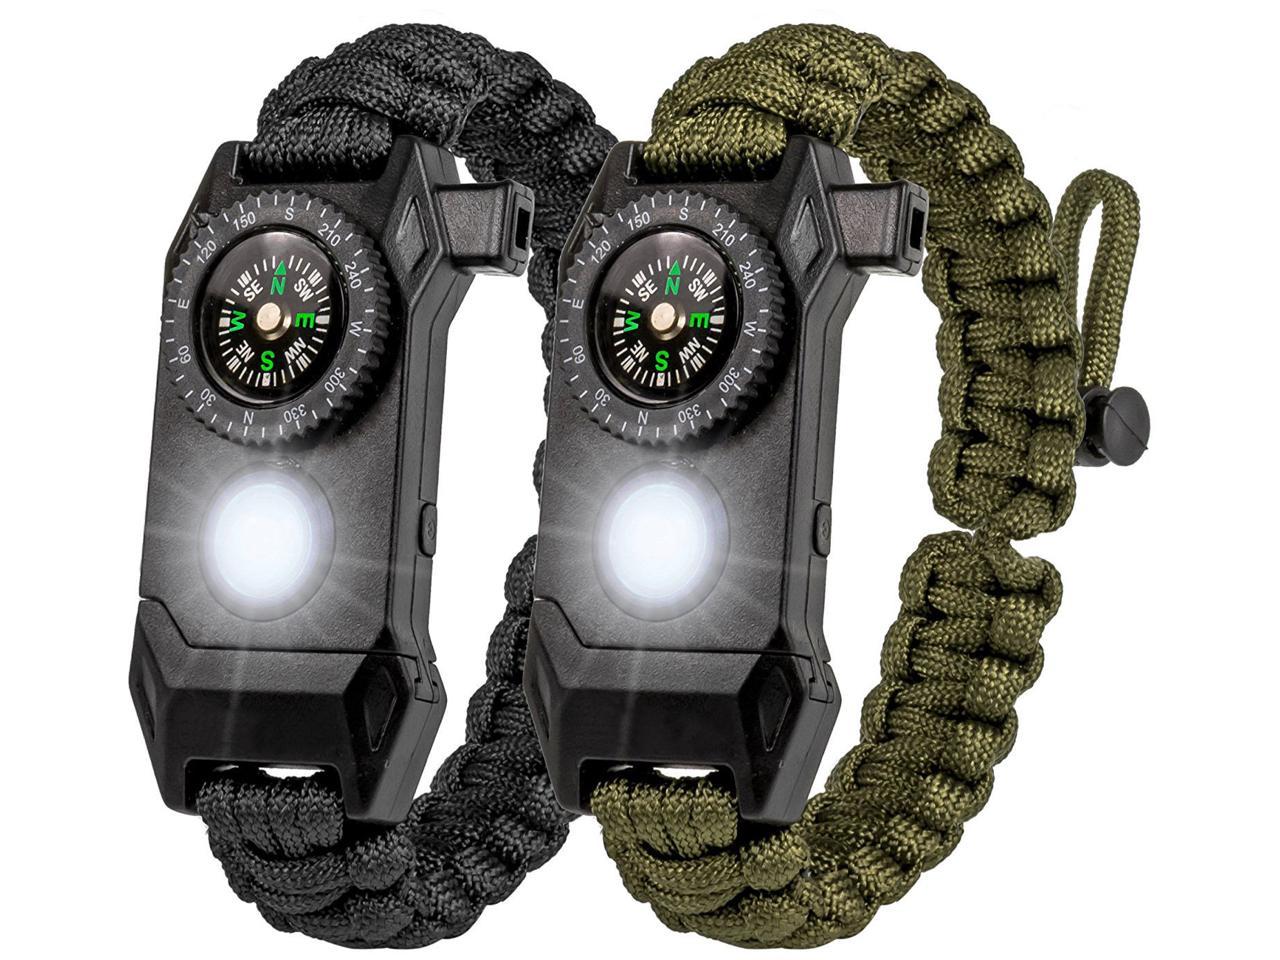 Release Compass Whistle Buckle LED Light SOS Flash Flint Scraper Fire Starter Prarchute 550 Cord Paracord Bracelet Outdoor Camp Backpack Accessories 11/16 Webbing Size